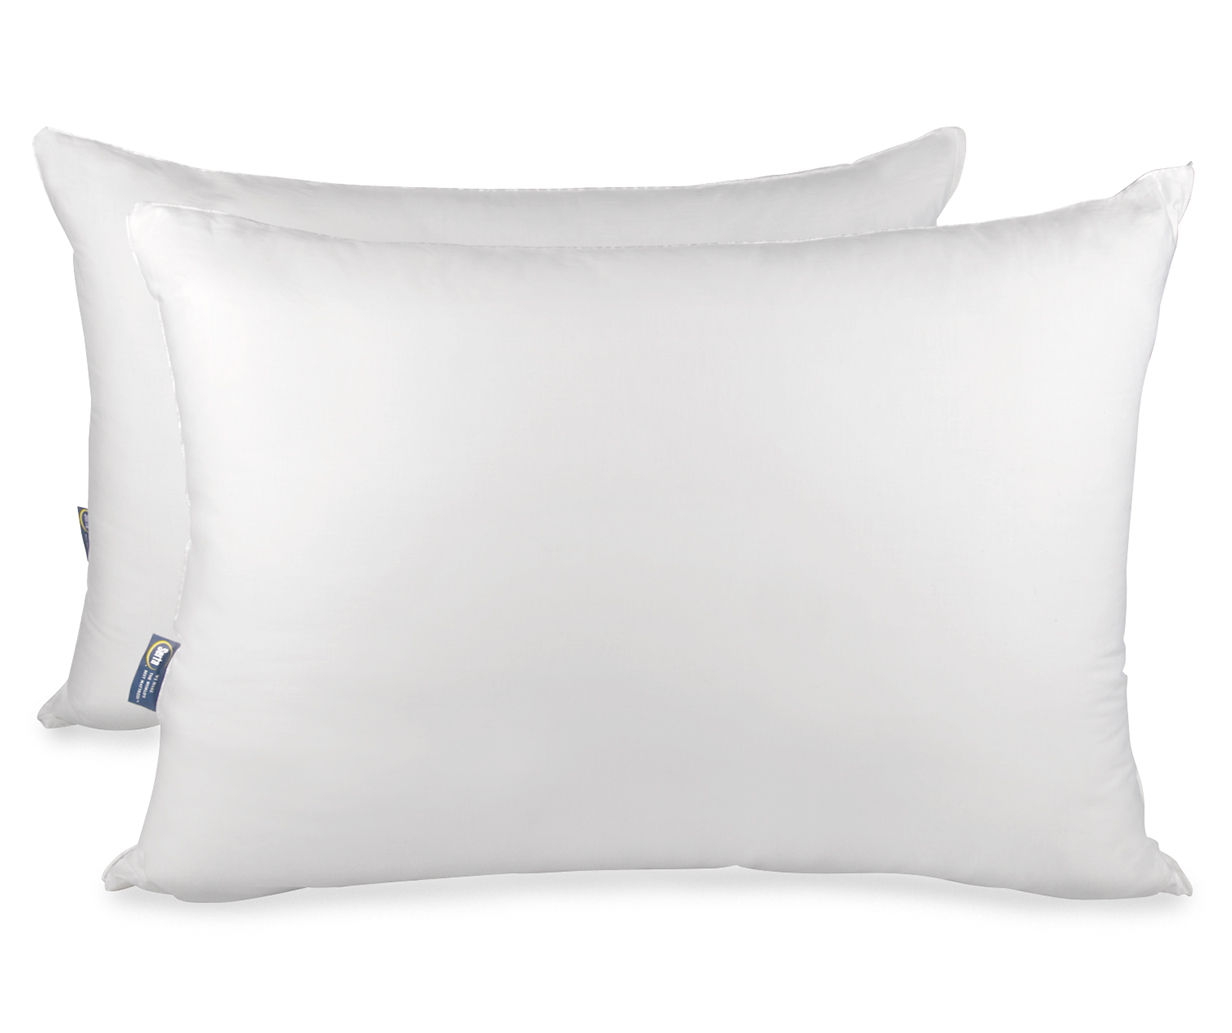 PillowEase™ - Our Large Pillow provides the largest area of